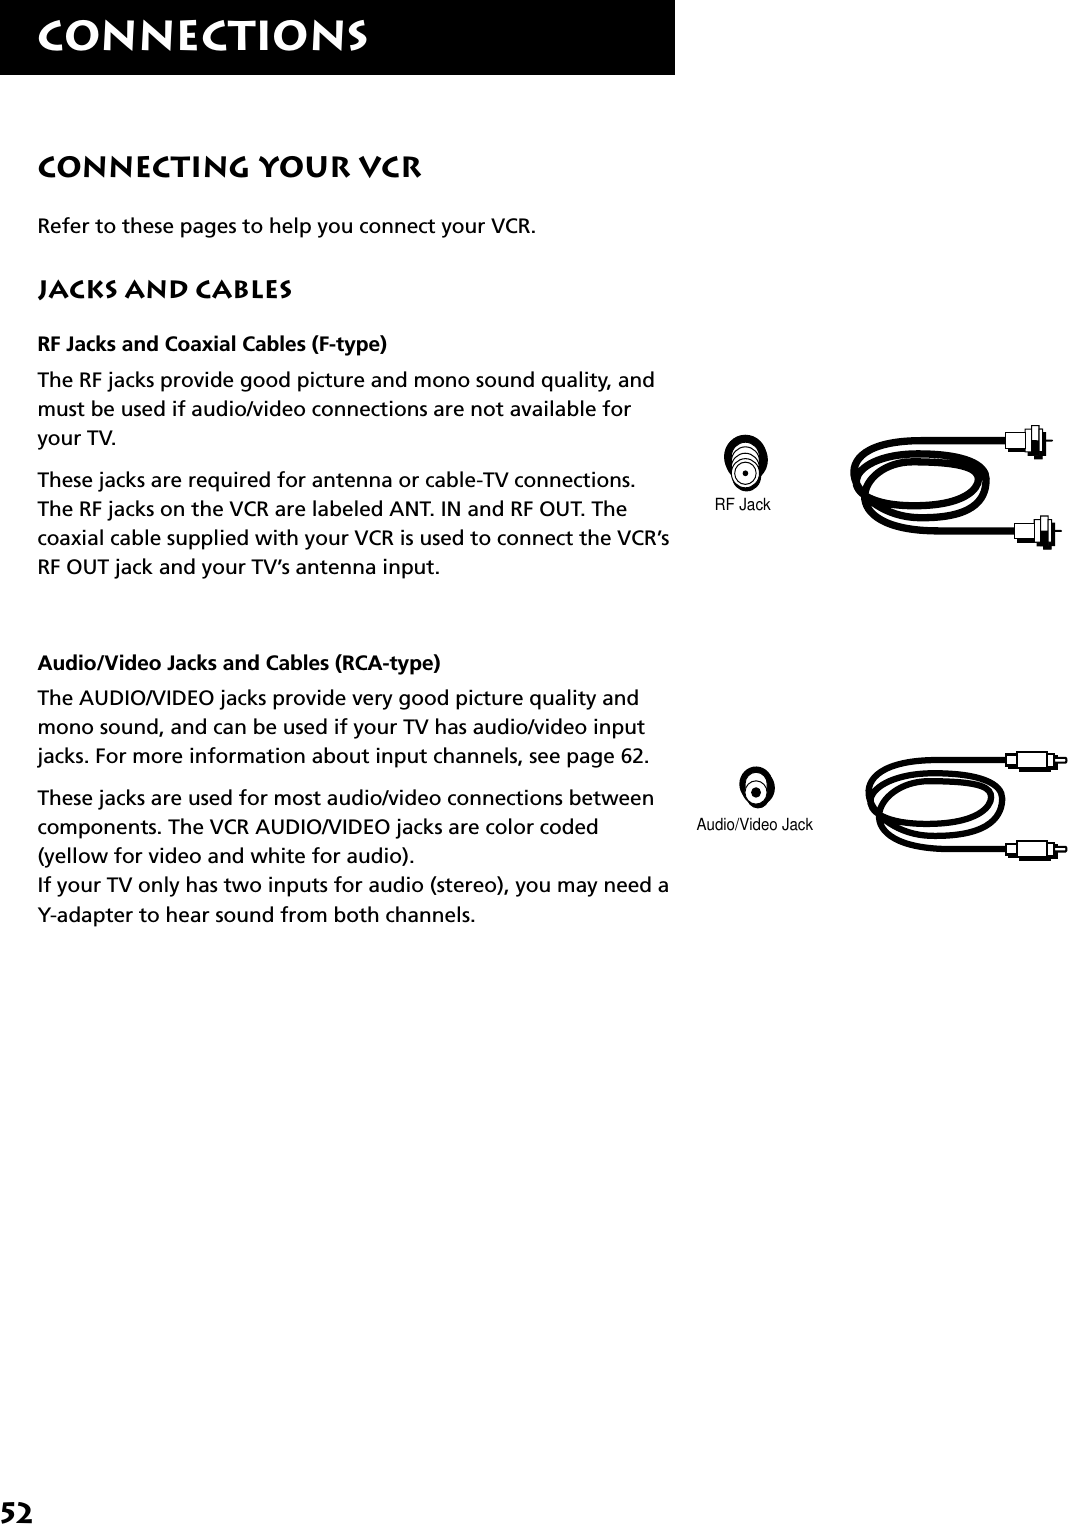 52ConnectionsConnecting Your VCRRefer to these pages to help you connect your VCR.Jacks and CablesRF Jacks and Coaxial Cables (F-type)The RF jacks provide good picture and mono sound quality, andmust be used if audio/video connections are not available foryour TV.These jacks are required for antenna or cable-TV connections.The RF jacks on the VCR are labeled ANT. IN and RF OUT. Thecoaxial cable supplied with your VCR is used to connect the VCR’sRF OUT jack and your TV’s antenna input.Audio/Video Jacks and Cables (RCA-type)The AUDIO/VIDEO jacks provide very good picture quality andmono sound, and can be used if your TV has audio/video inputjacks. For more information about input channels, see page 62.These jacks are used for most audio/video connections betweencomponents. The VCR AUDIO/VIDEO jacks are color coded(yellow for video and white for audio).If your TV only has two inputs for audio (stereo), you may need aY-adapter to hear sound from both channels.RF JackAudio/Video Jack